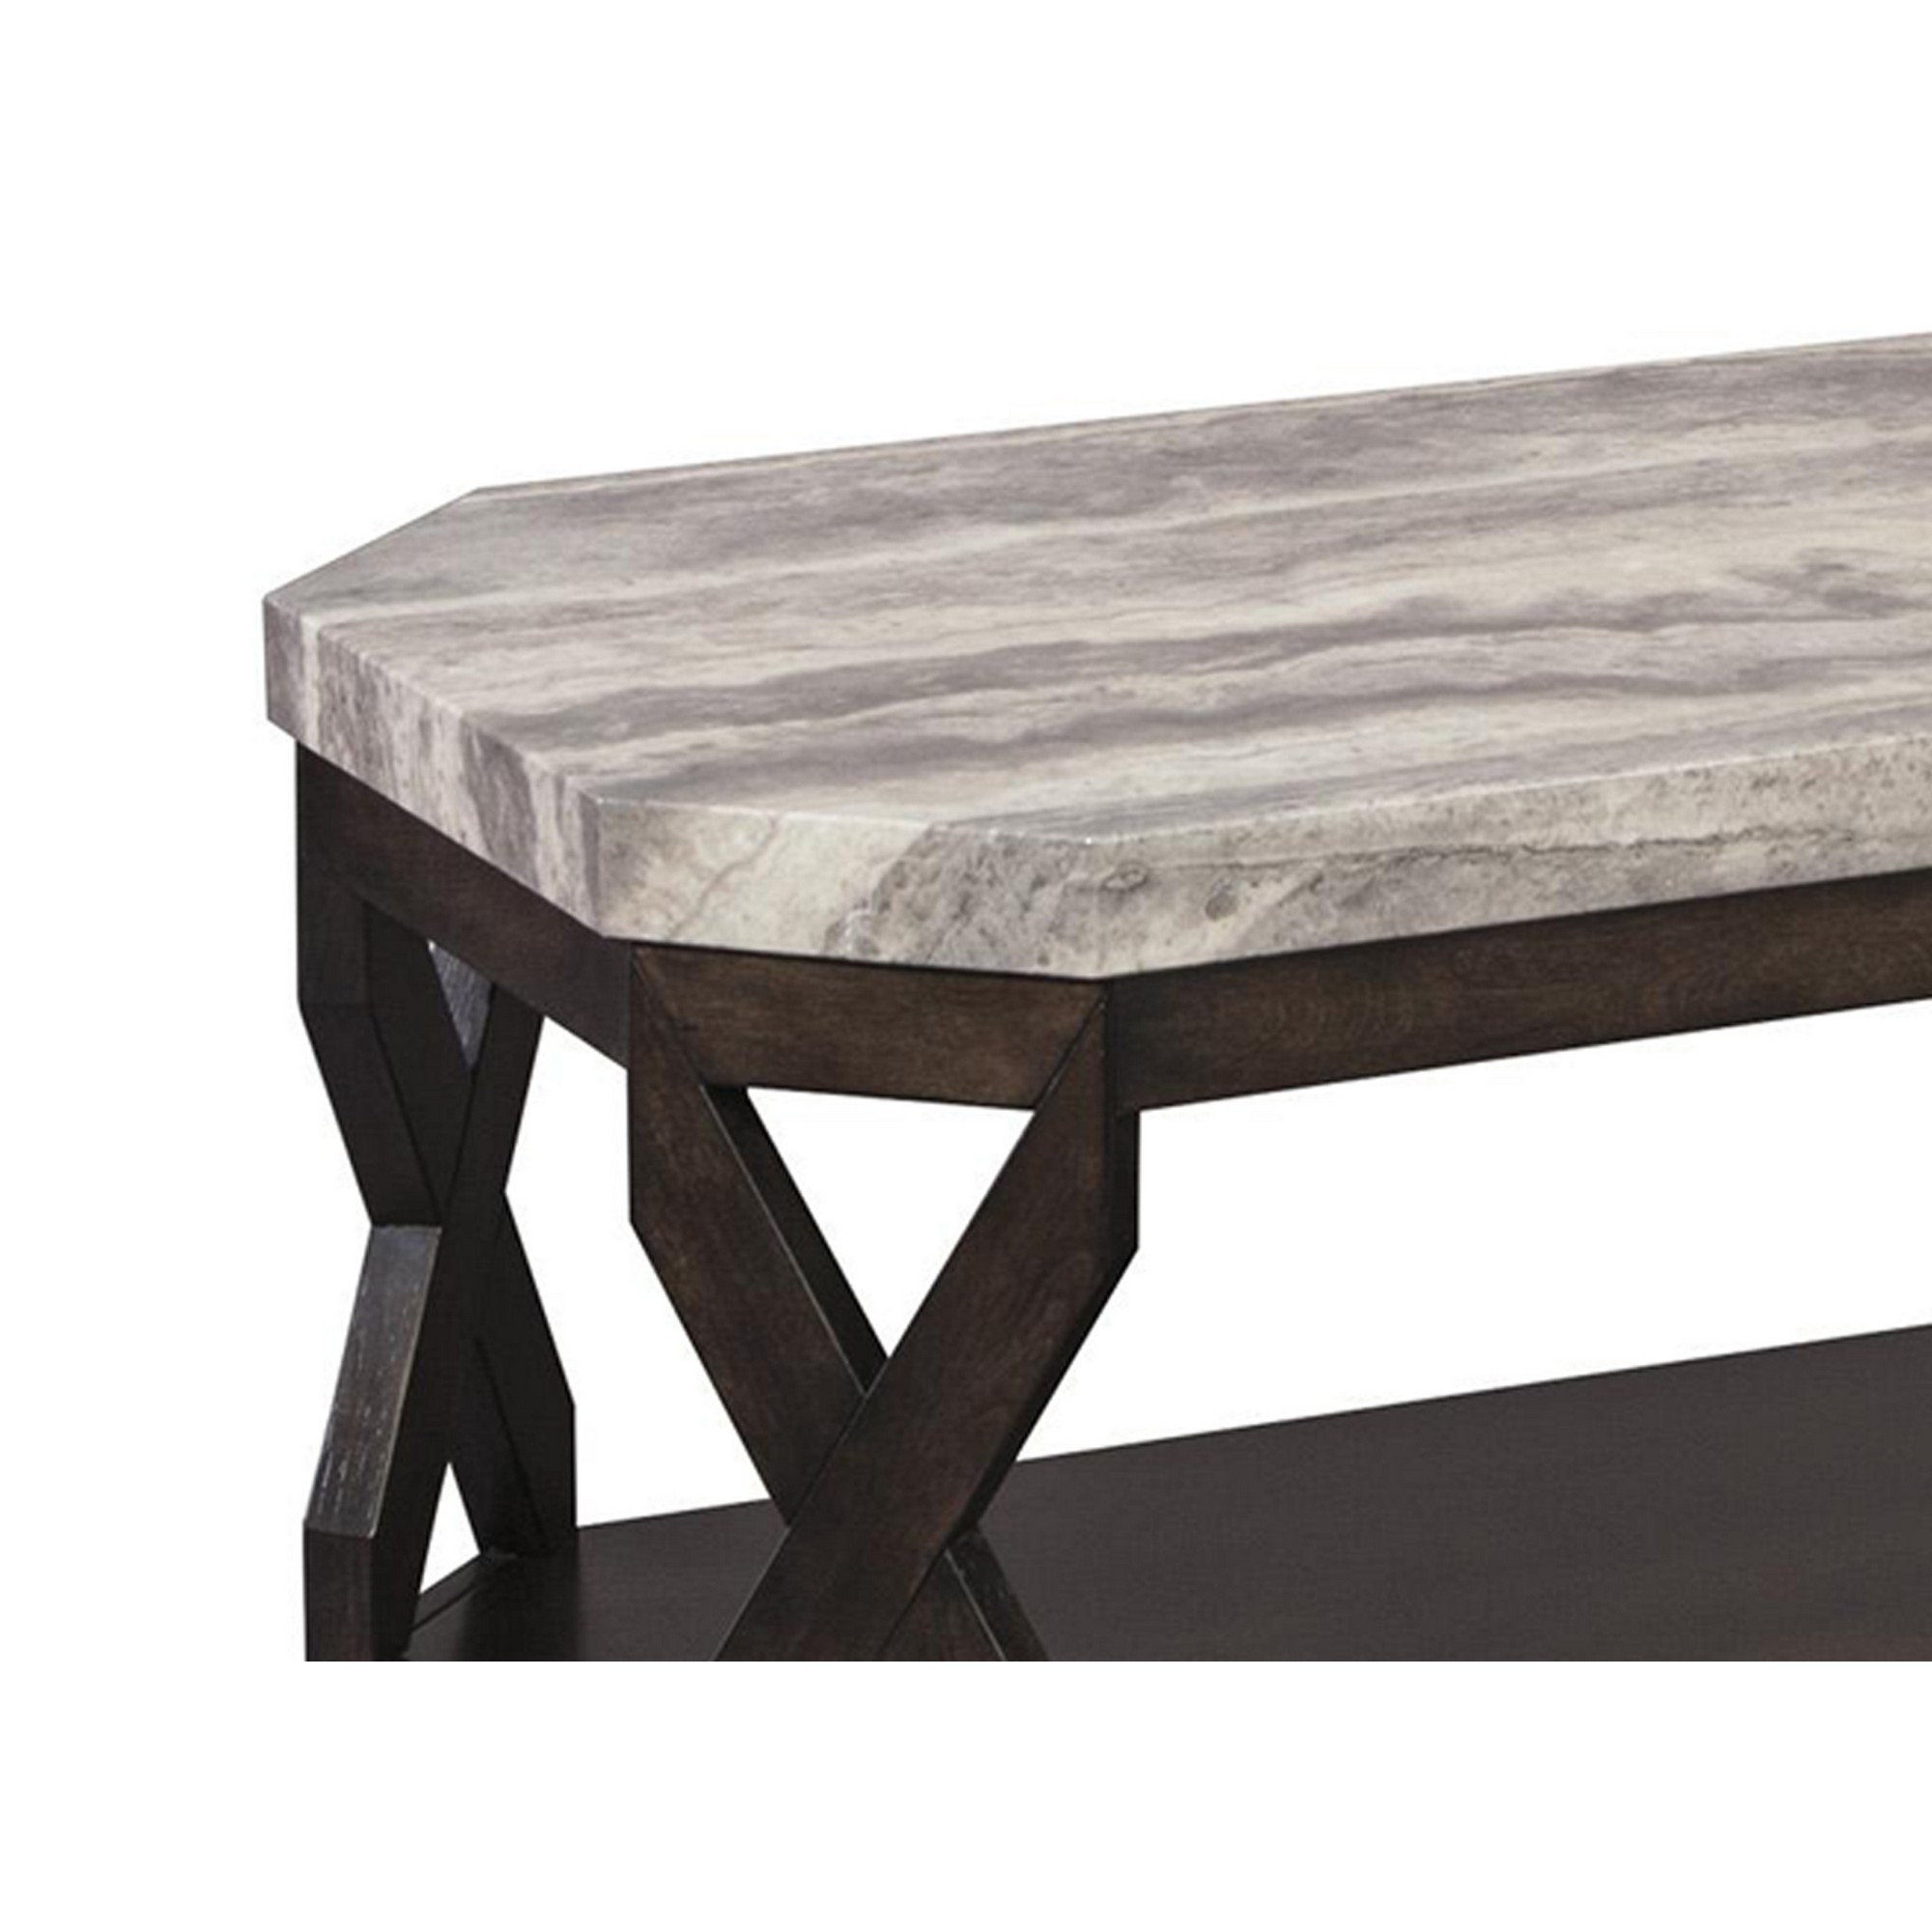 Faux Marble Table Set With 1 Coffee Table And 2 End Tables, Gray And Brown- Saltoro Sherpi